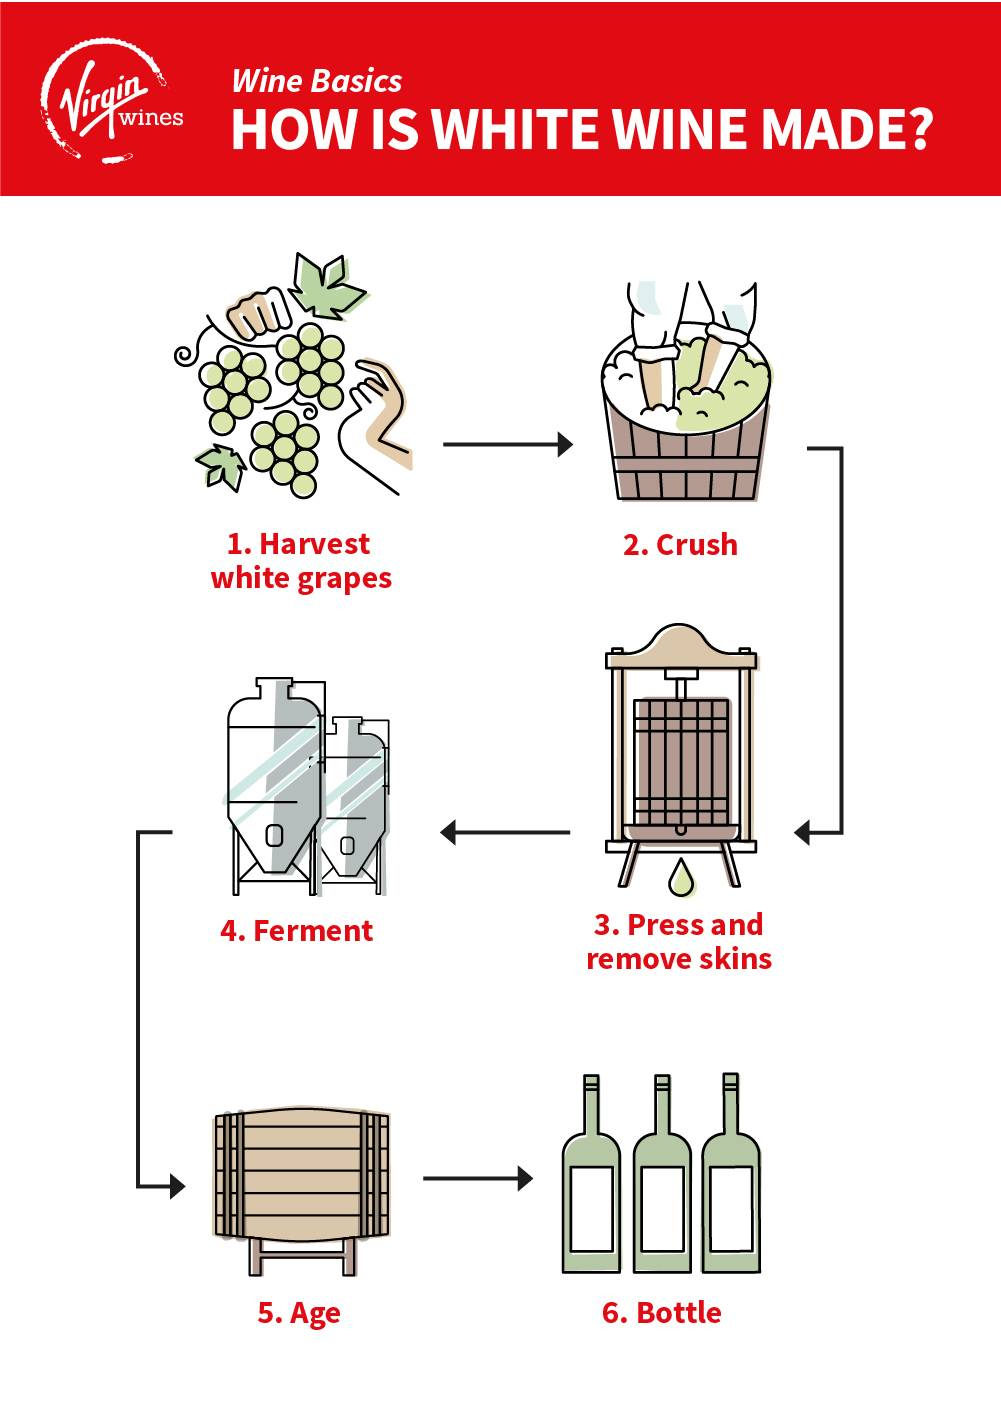 Infographic by Virgin Wines showing how white wine is made